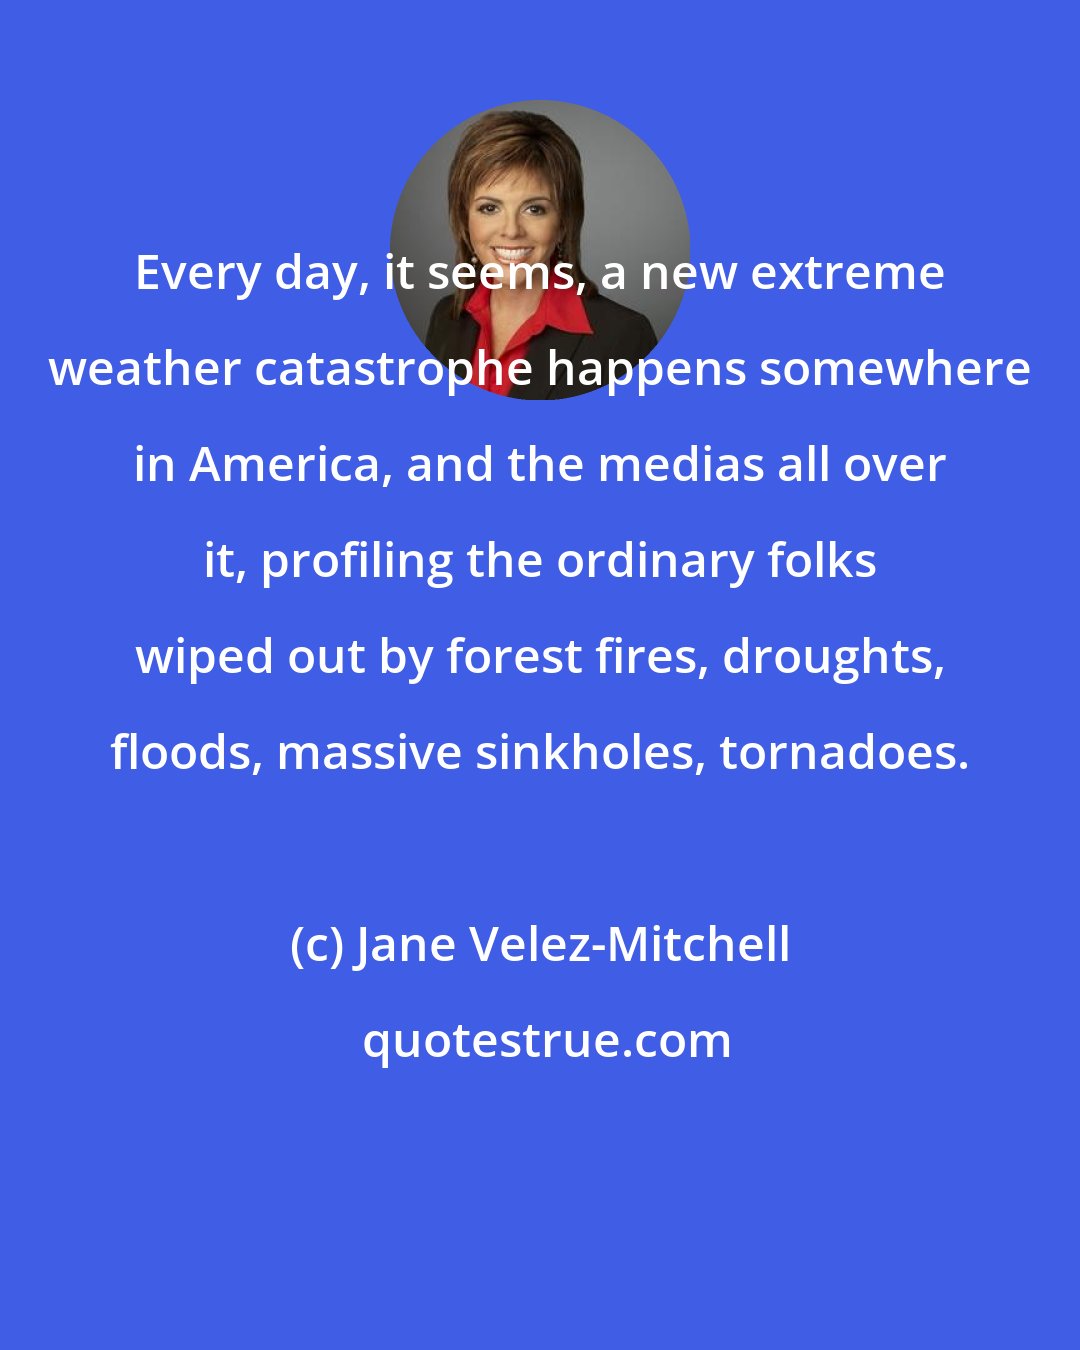 Jane Velez-Mitchell: Every day, it seems, a new extreme weather catastrophe happens somewhere in America, and the medias all over it, profiling the ordinary folks wiped out by forest fires, droughts, floods, massive sinkholes, tornadoes.